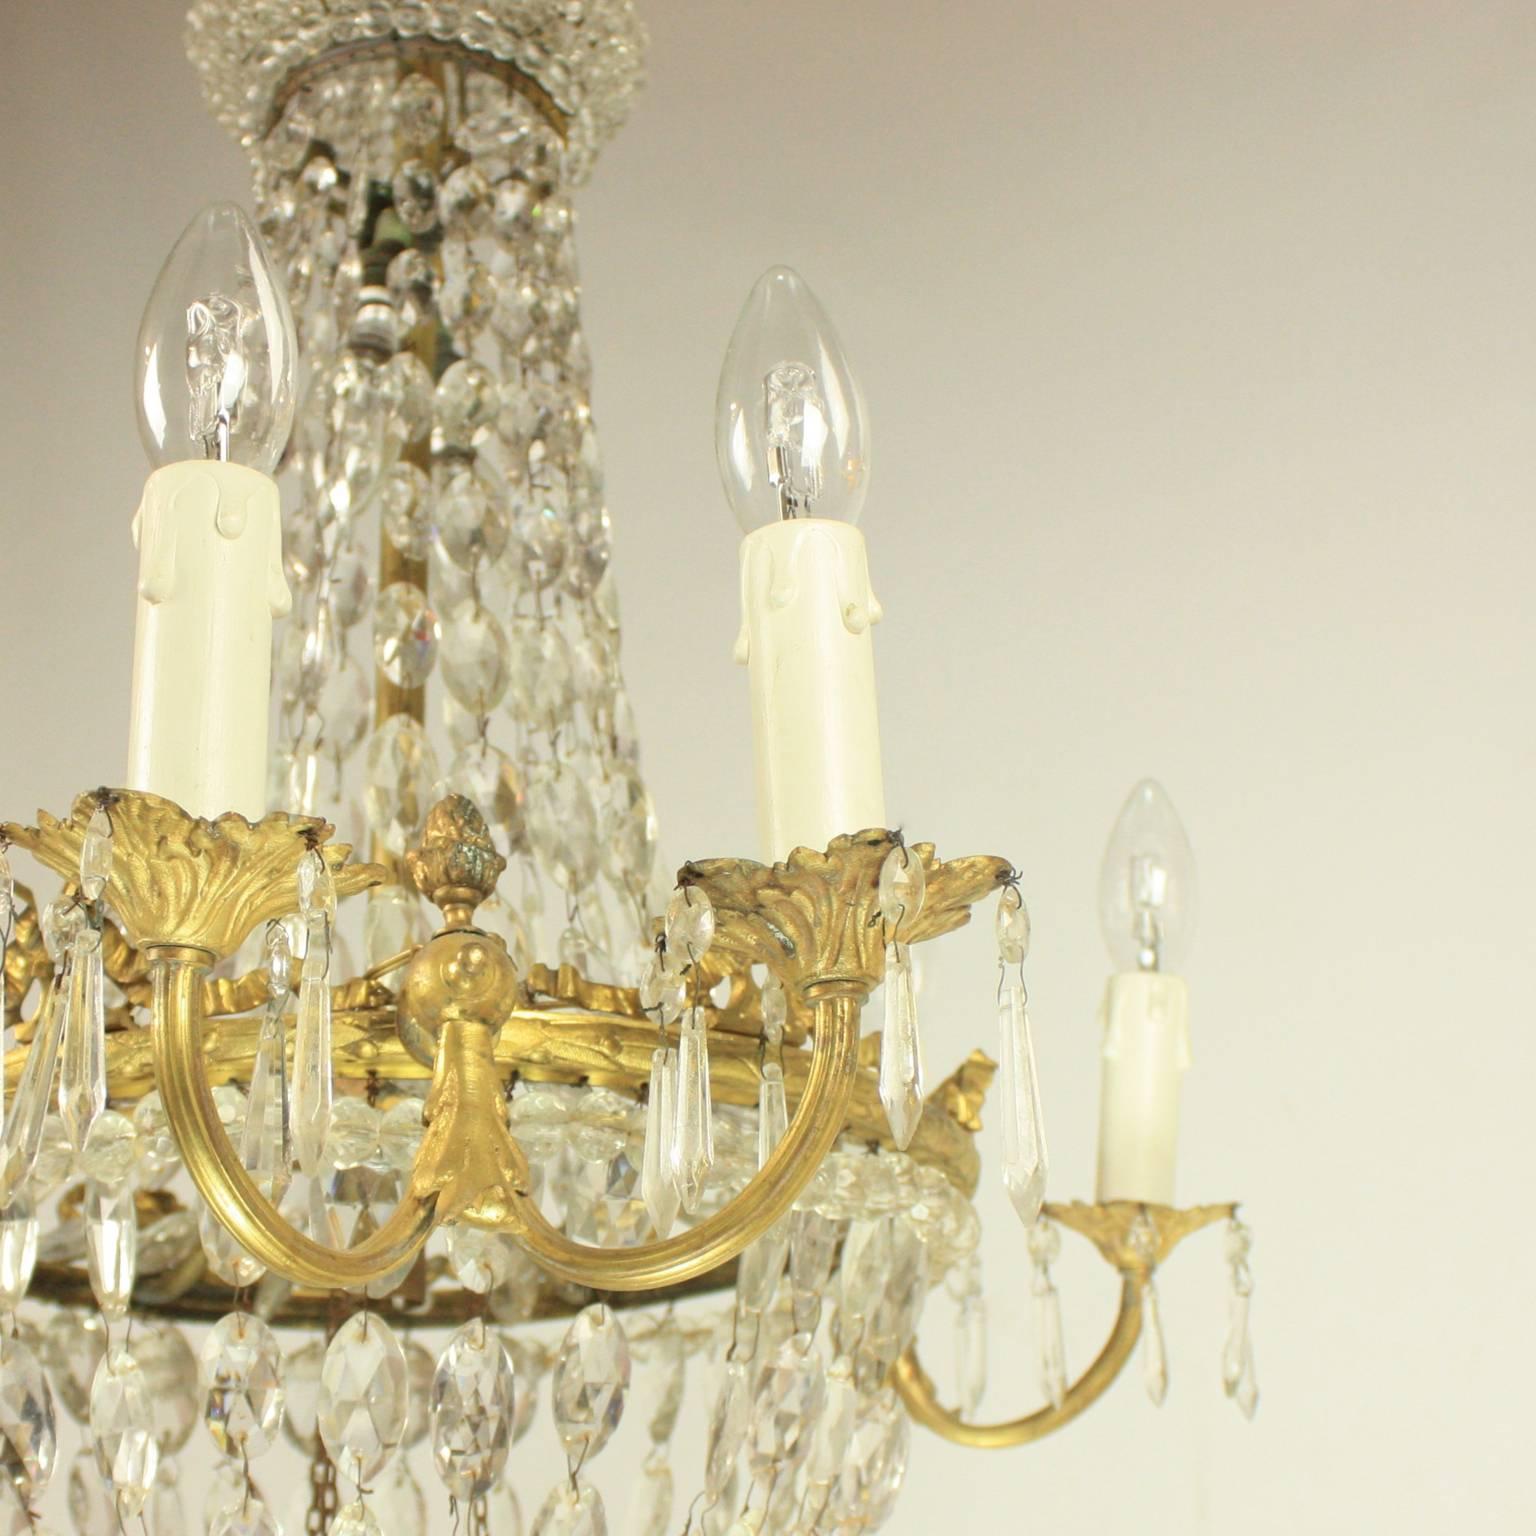 Faceted Late 19th Century French Basket Chandelier with a Crown-Shaped Corona